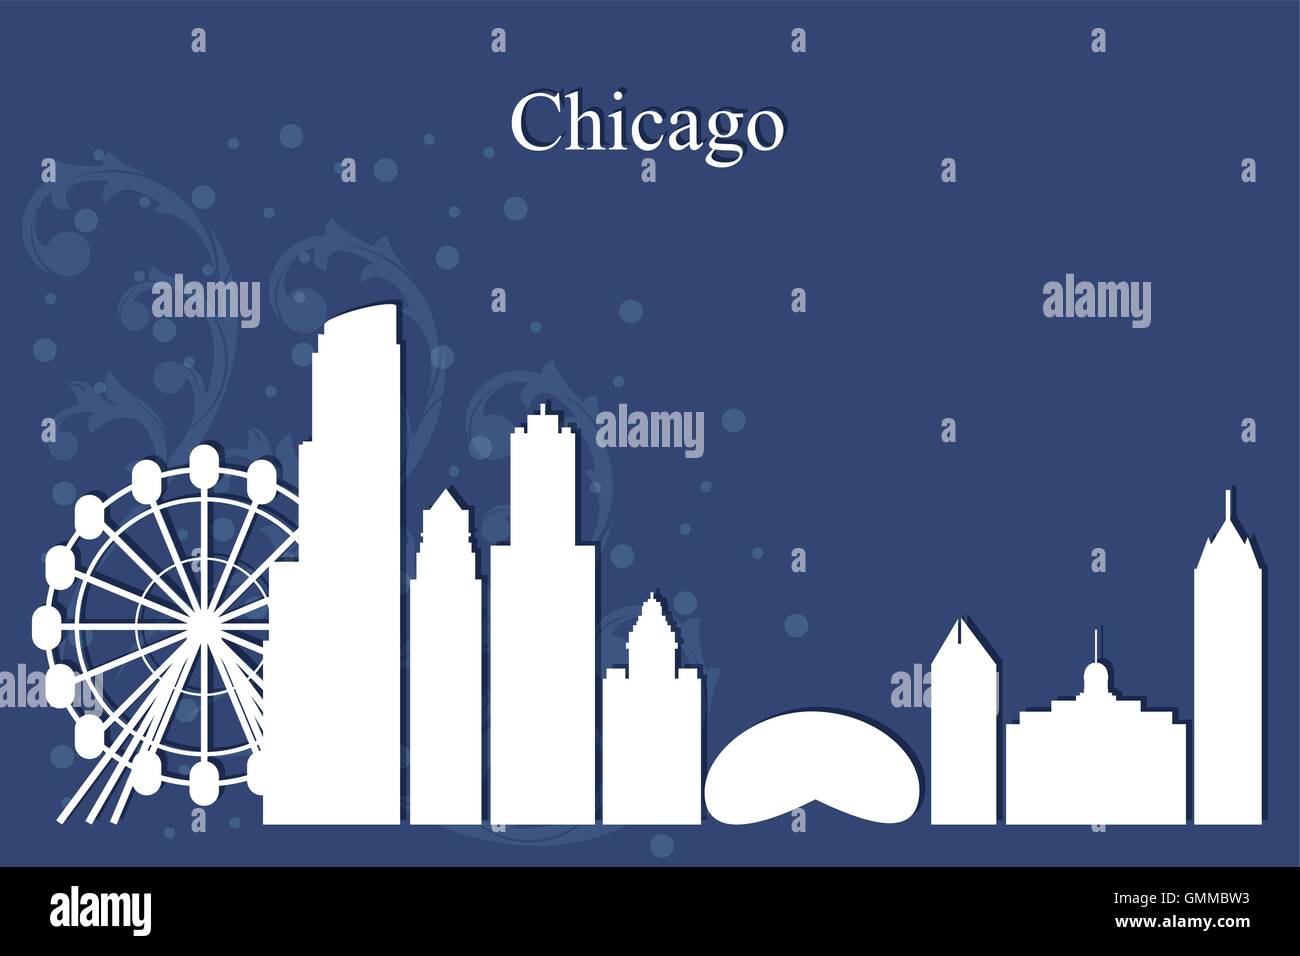 Chicago city skyline silhouette on blue background Stock Vector